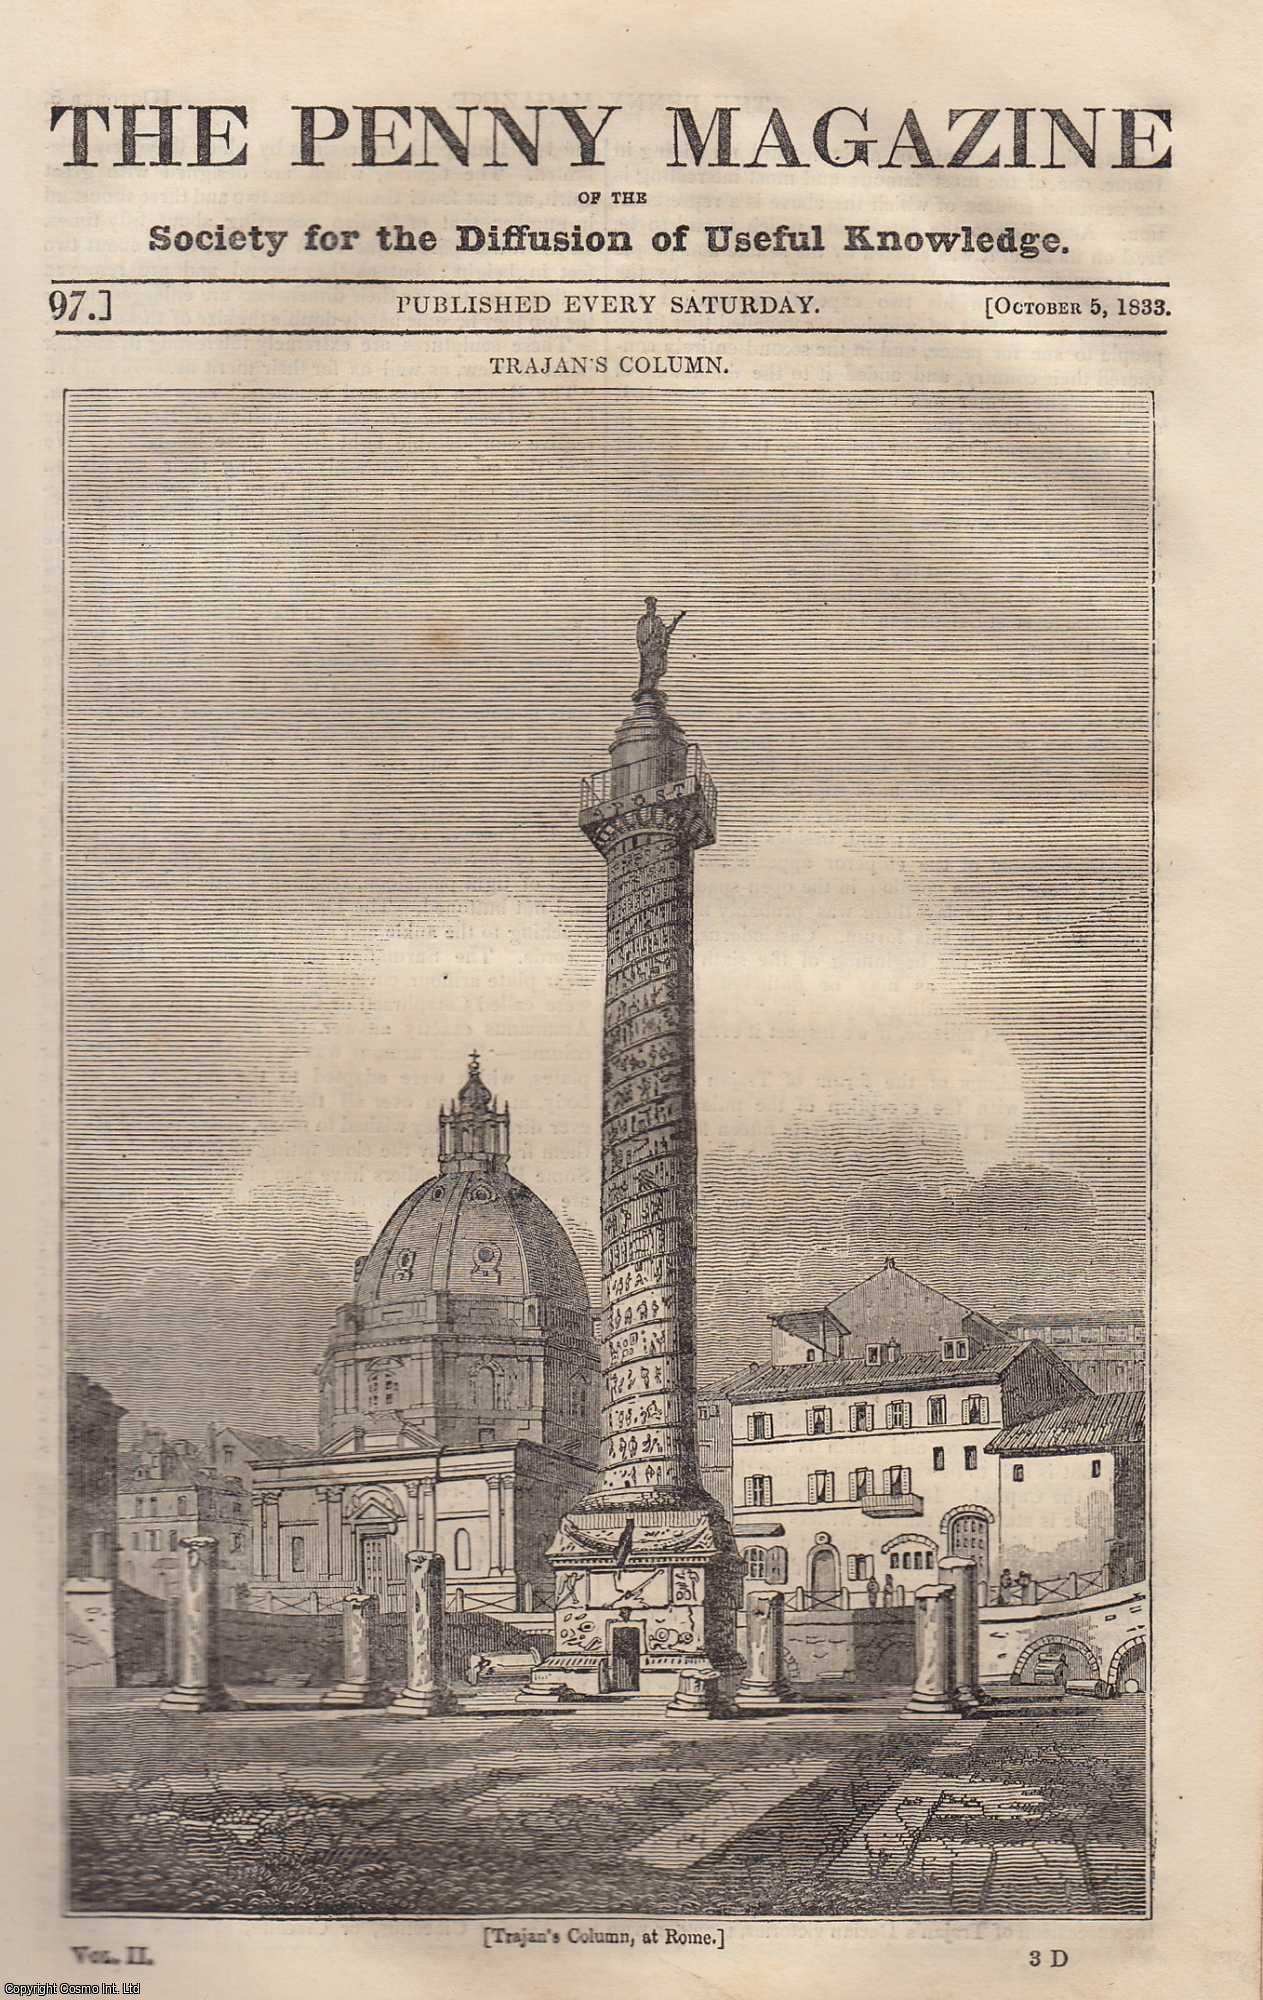 Penny Magazine - Trajan's Column, Rome; The Cathedral of Rochester; The Wild Turkey (bird), etc. Issue No. 97, October 5th, 1833. A complete original weekly issue of the Penny Magazine, 1833.